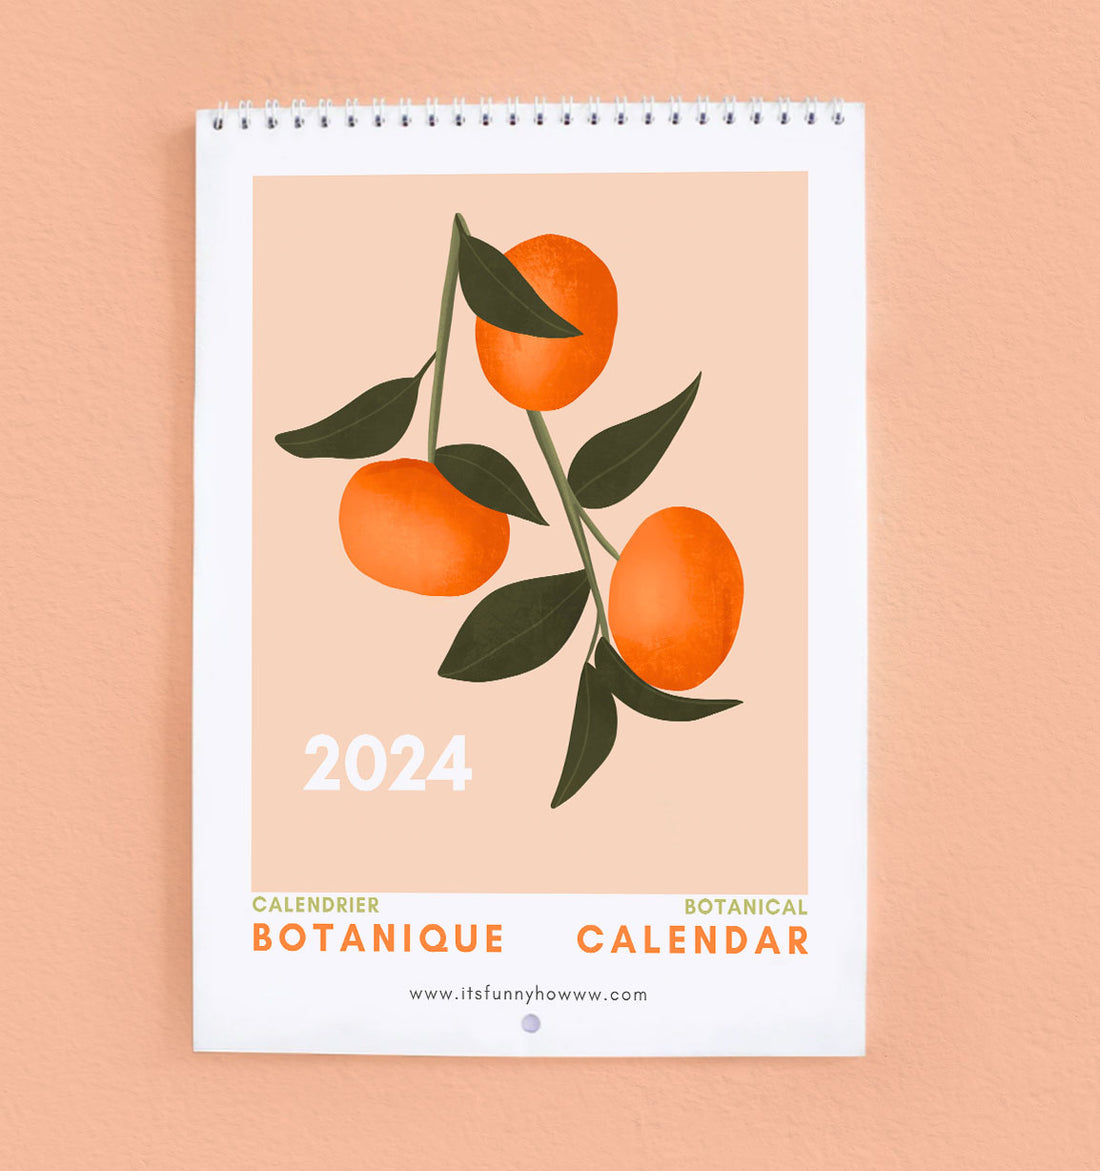 Calendriers – Itsfunnyhowww